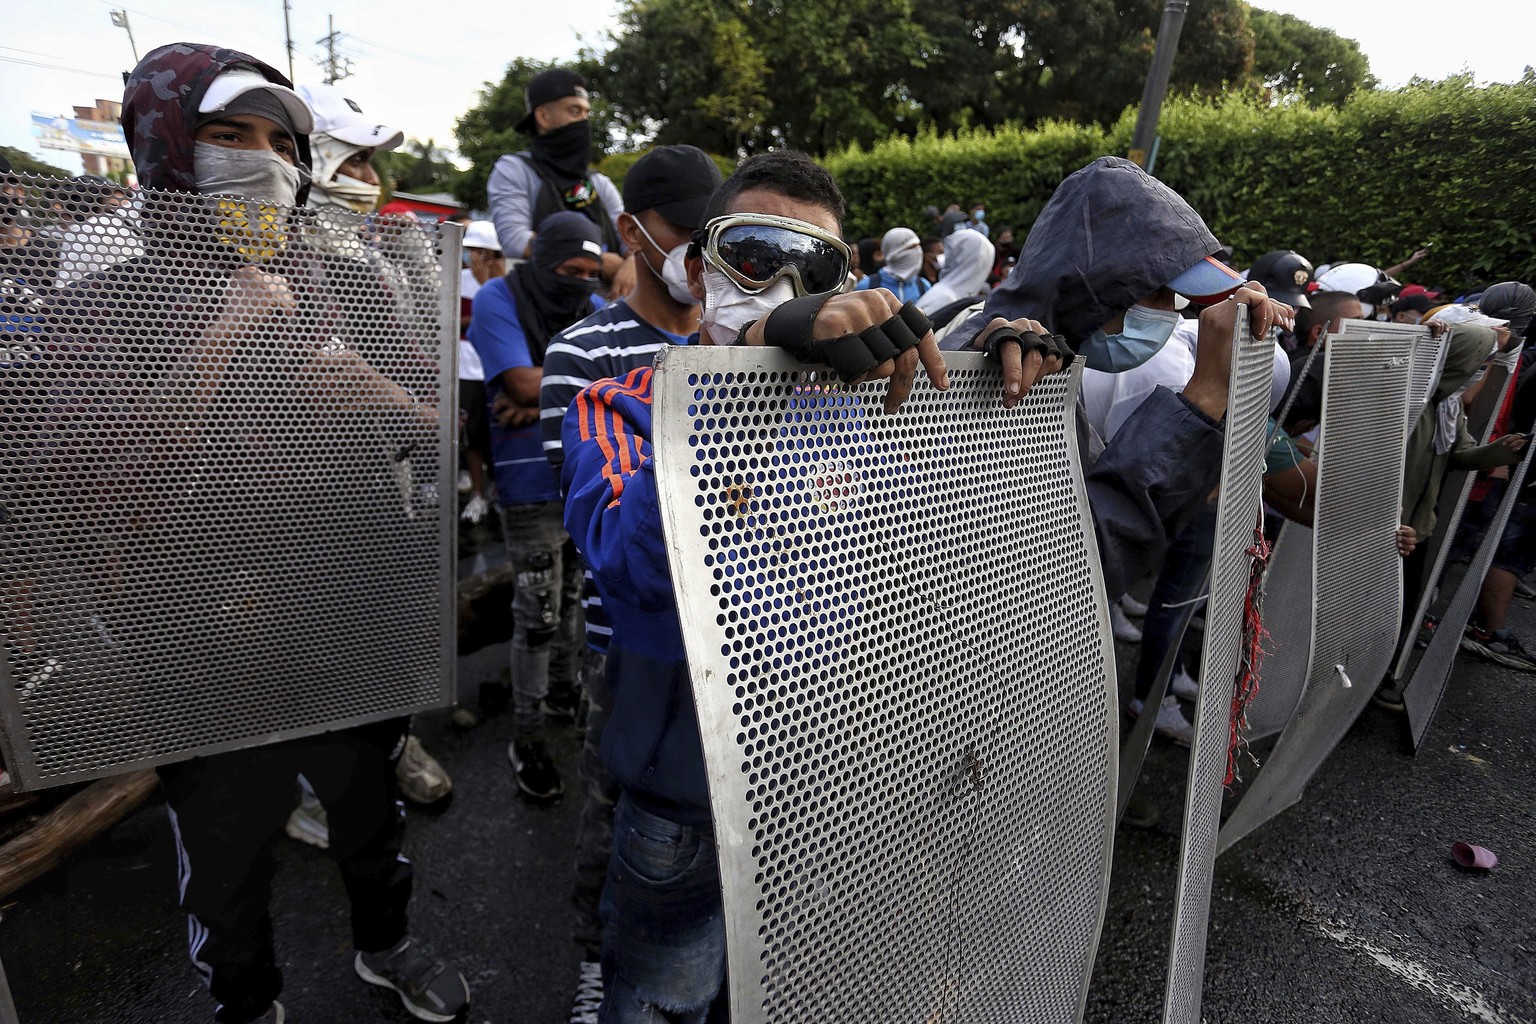 Protesters stand behind makeshift shields during a national strike to protest government-proposed tax reform, in Cali, Colombia, Friday, April 30, 2021. (AP Photo/Andres Gonzalez)